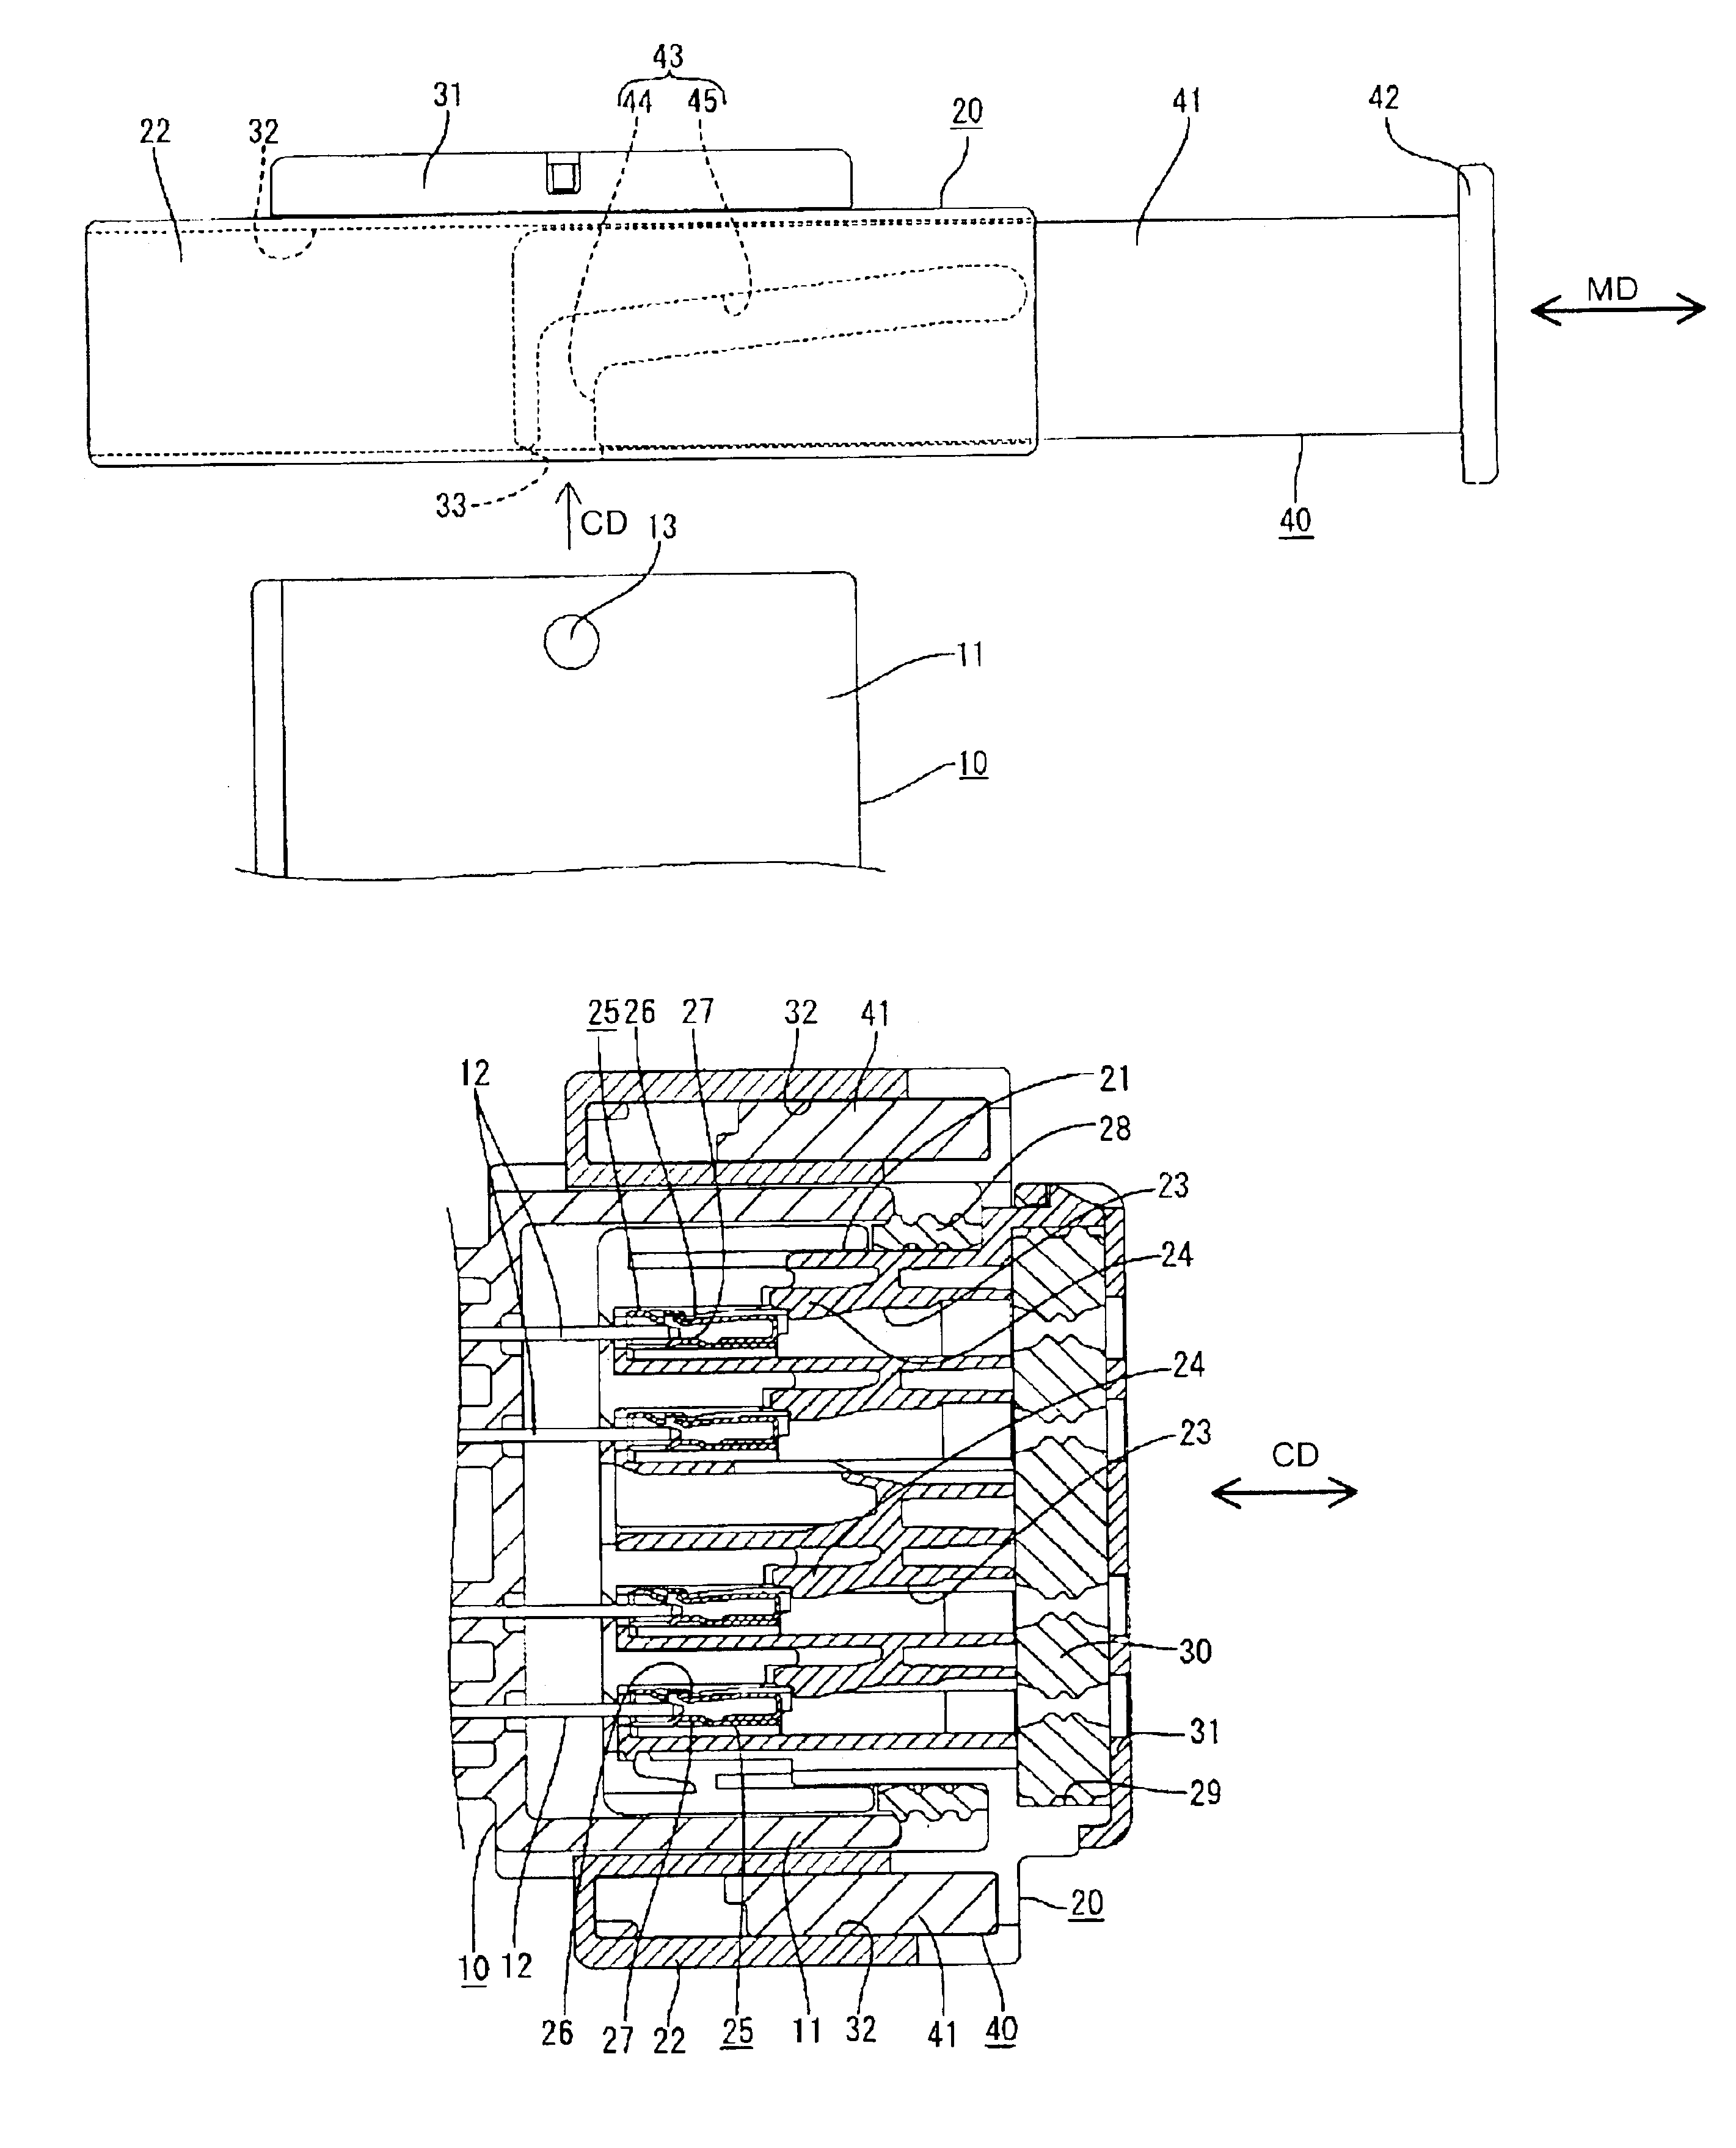 Connector having an operable member and a method of assembling such a connector